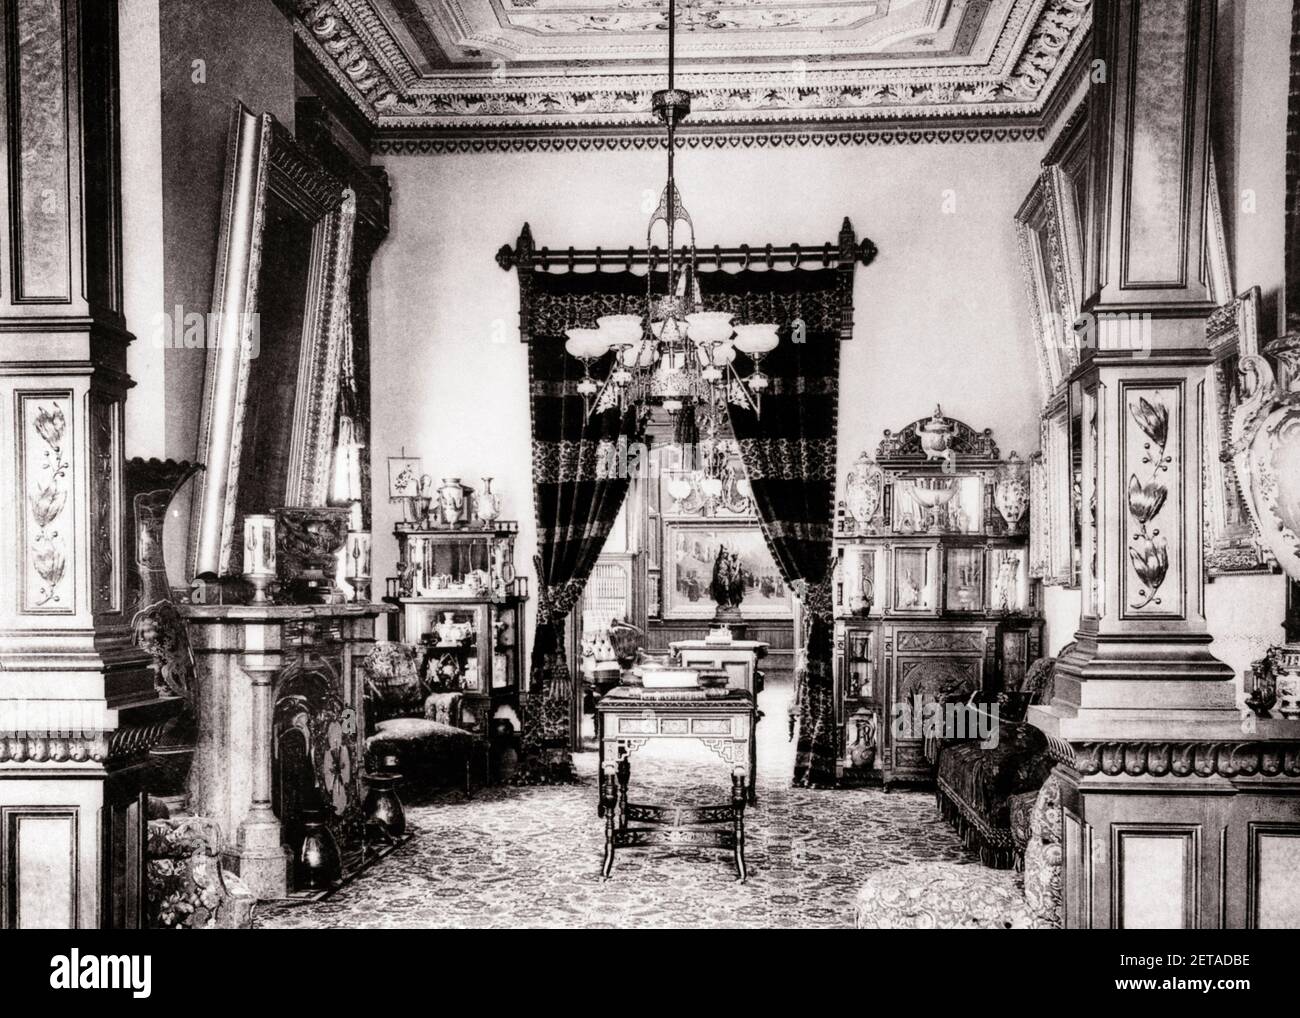 1880s PARLOR FURNITURE IN A MILLIONAIRE'S ORNATE HOME TURN OF THE 20TH CENTURY USA - o2371 SPL001 HARS LIVING ROOMS DRAPERY CARVED HOMES EXCESS ORNAMENTATION 19TH CENTURY CLUTTERED 1880s INTERIOR DESIGN PARLOR RESIDENCE STYLISH WOODWORK DETAILED MILLIONAIRE CEILING DECORATIVE DWELLING FIXTURES HOME DECOR LAVISH BLACK AND WHITE FURNISHINGS OLD FASHIONED Stock Photo